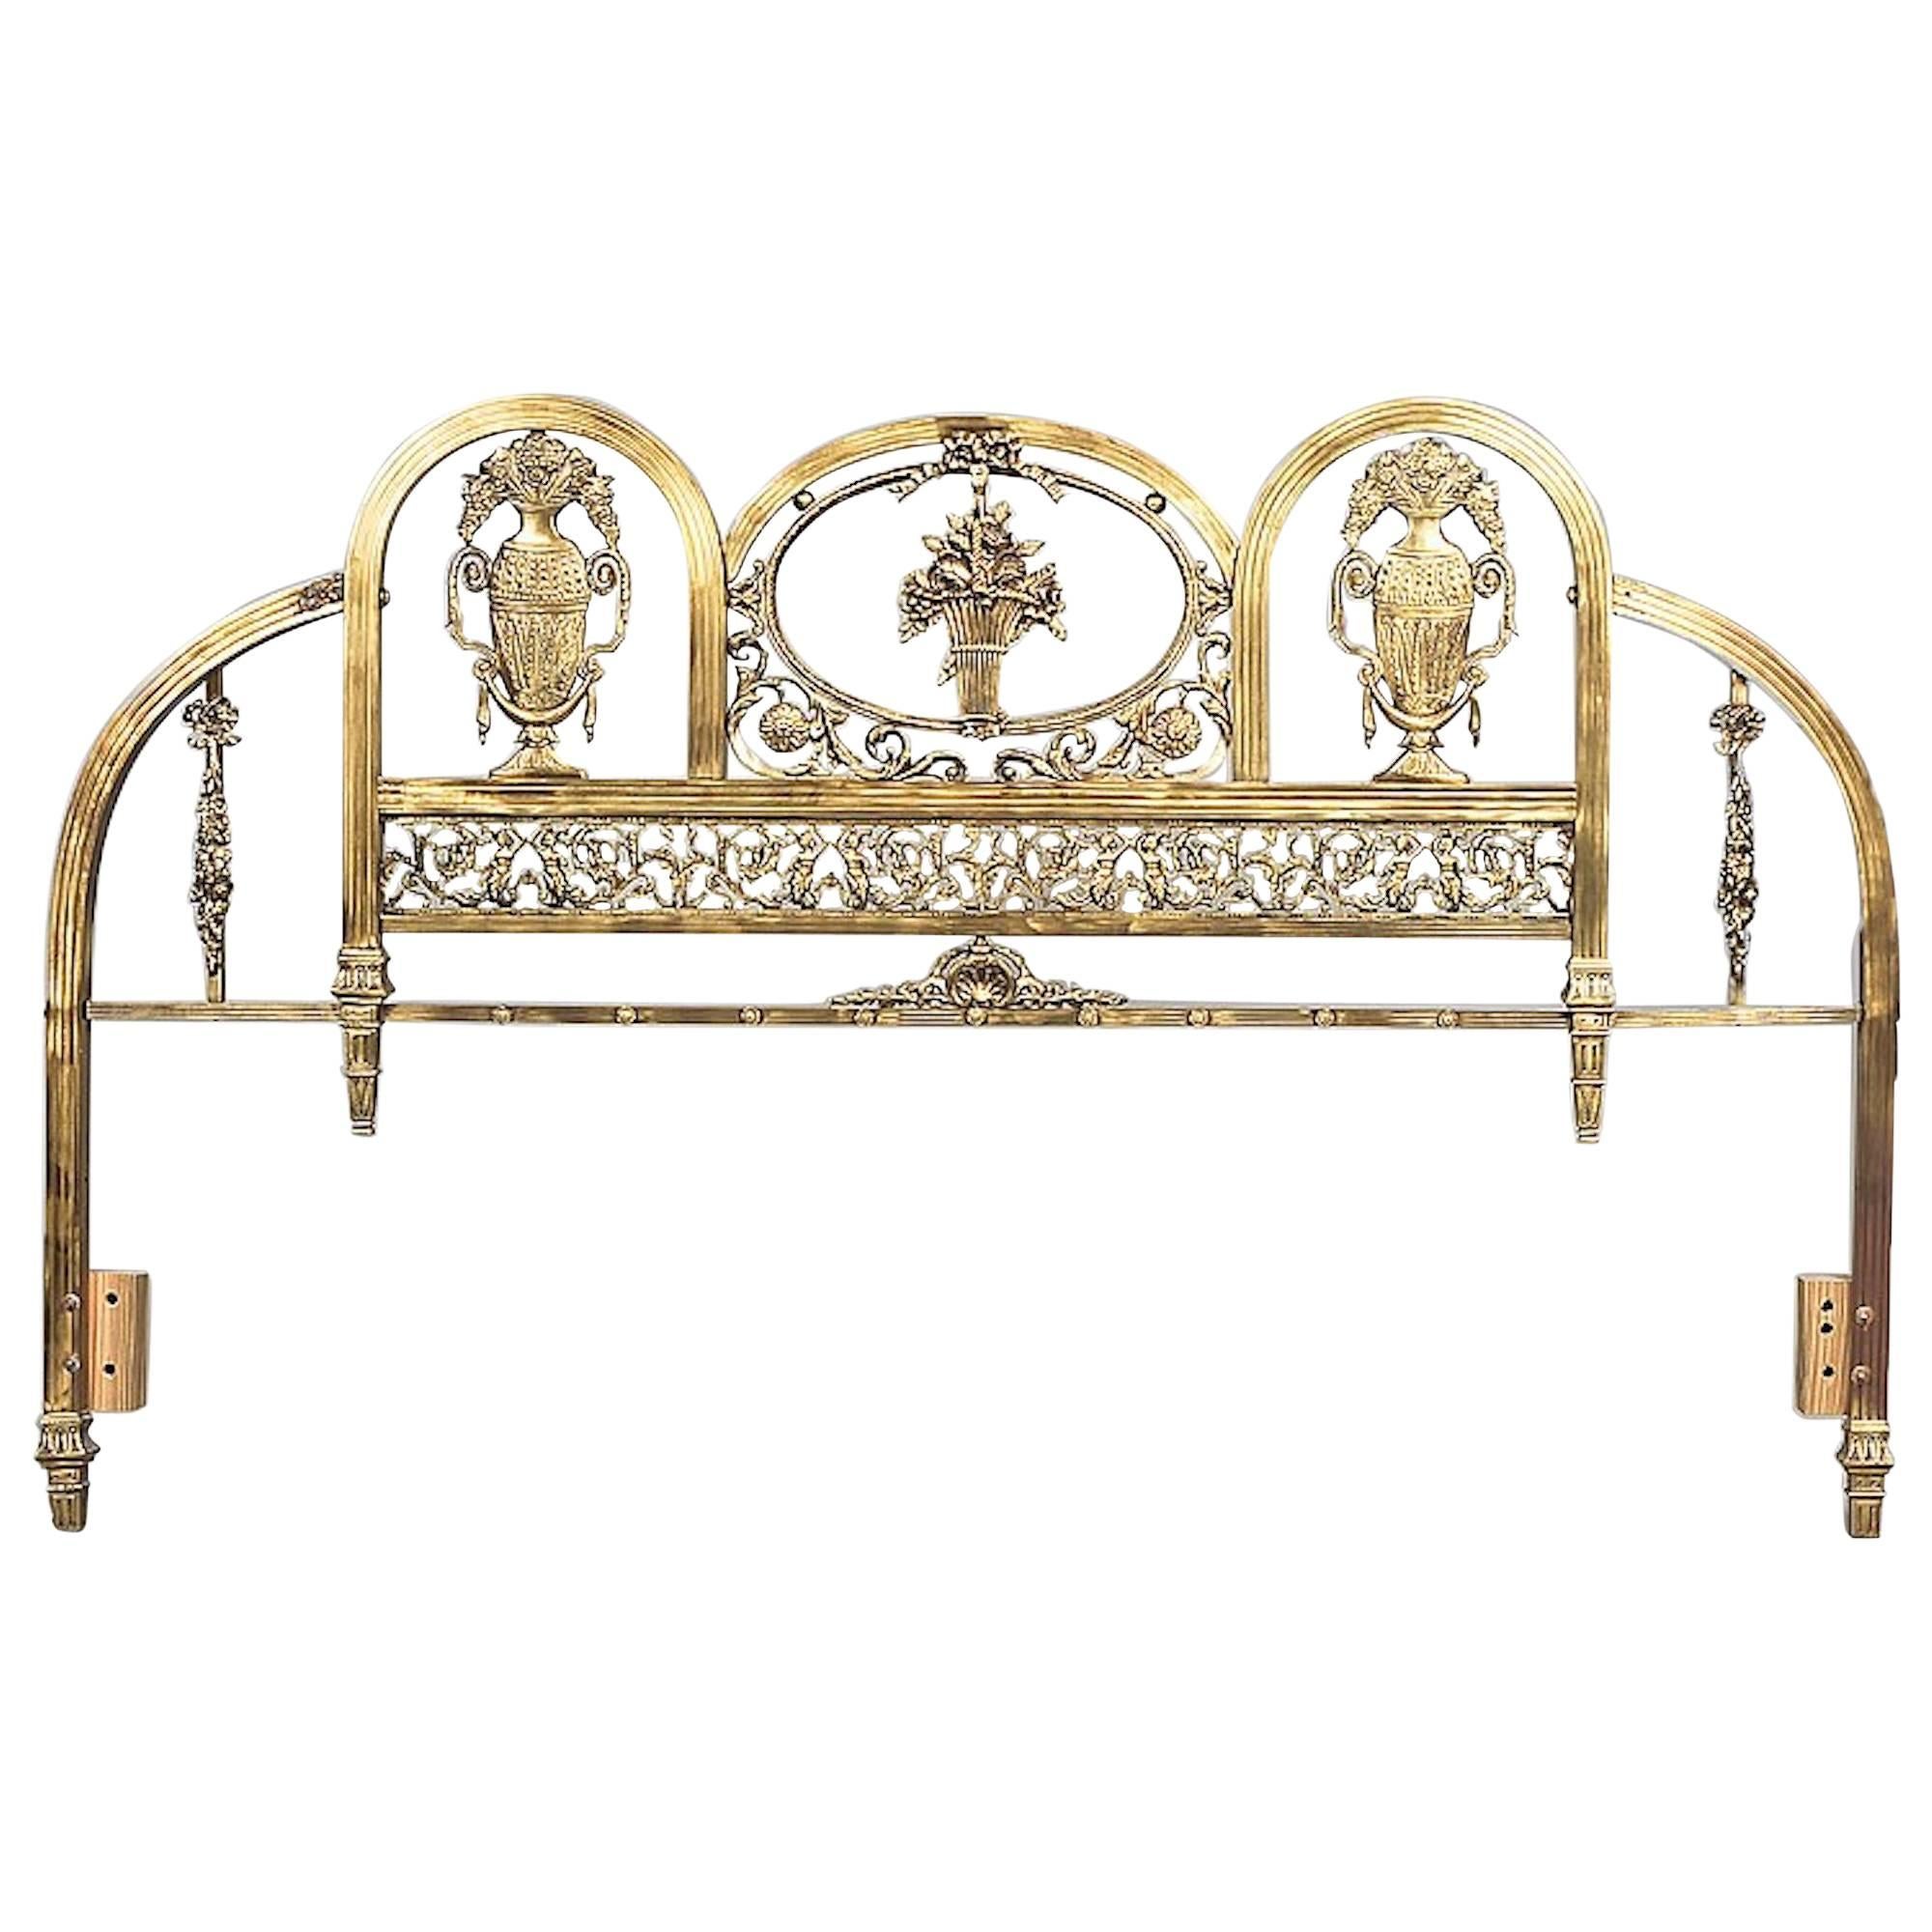 Victorian Style Brass and Glass Headboard